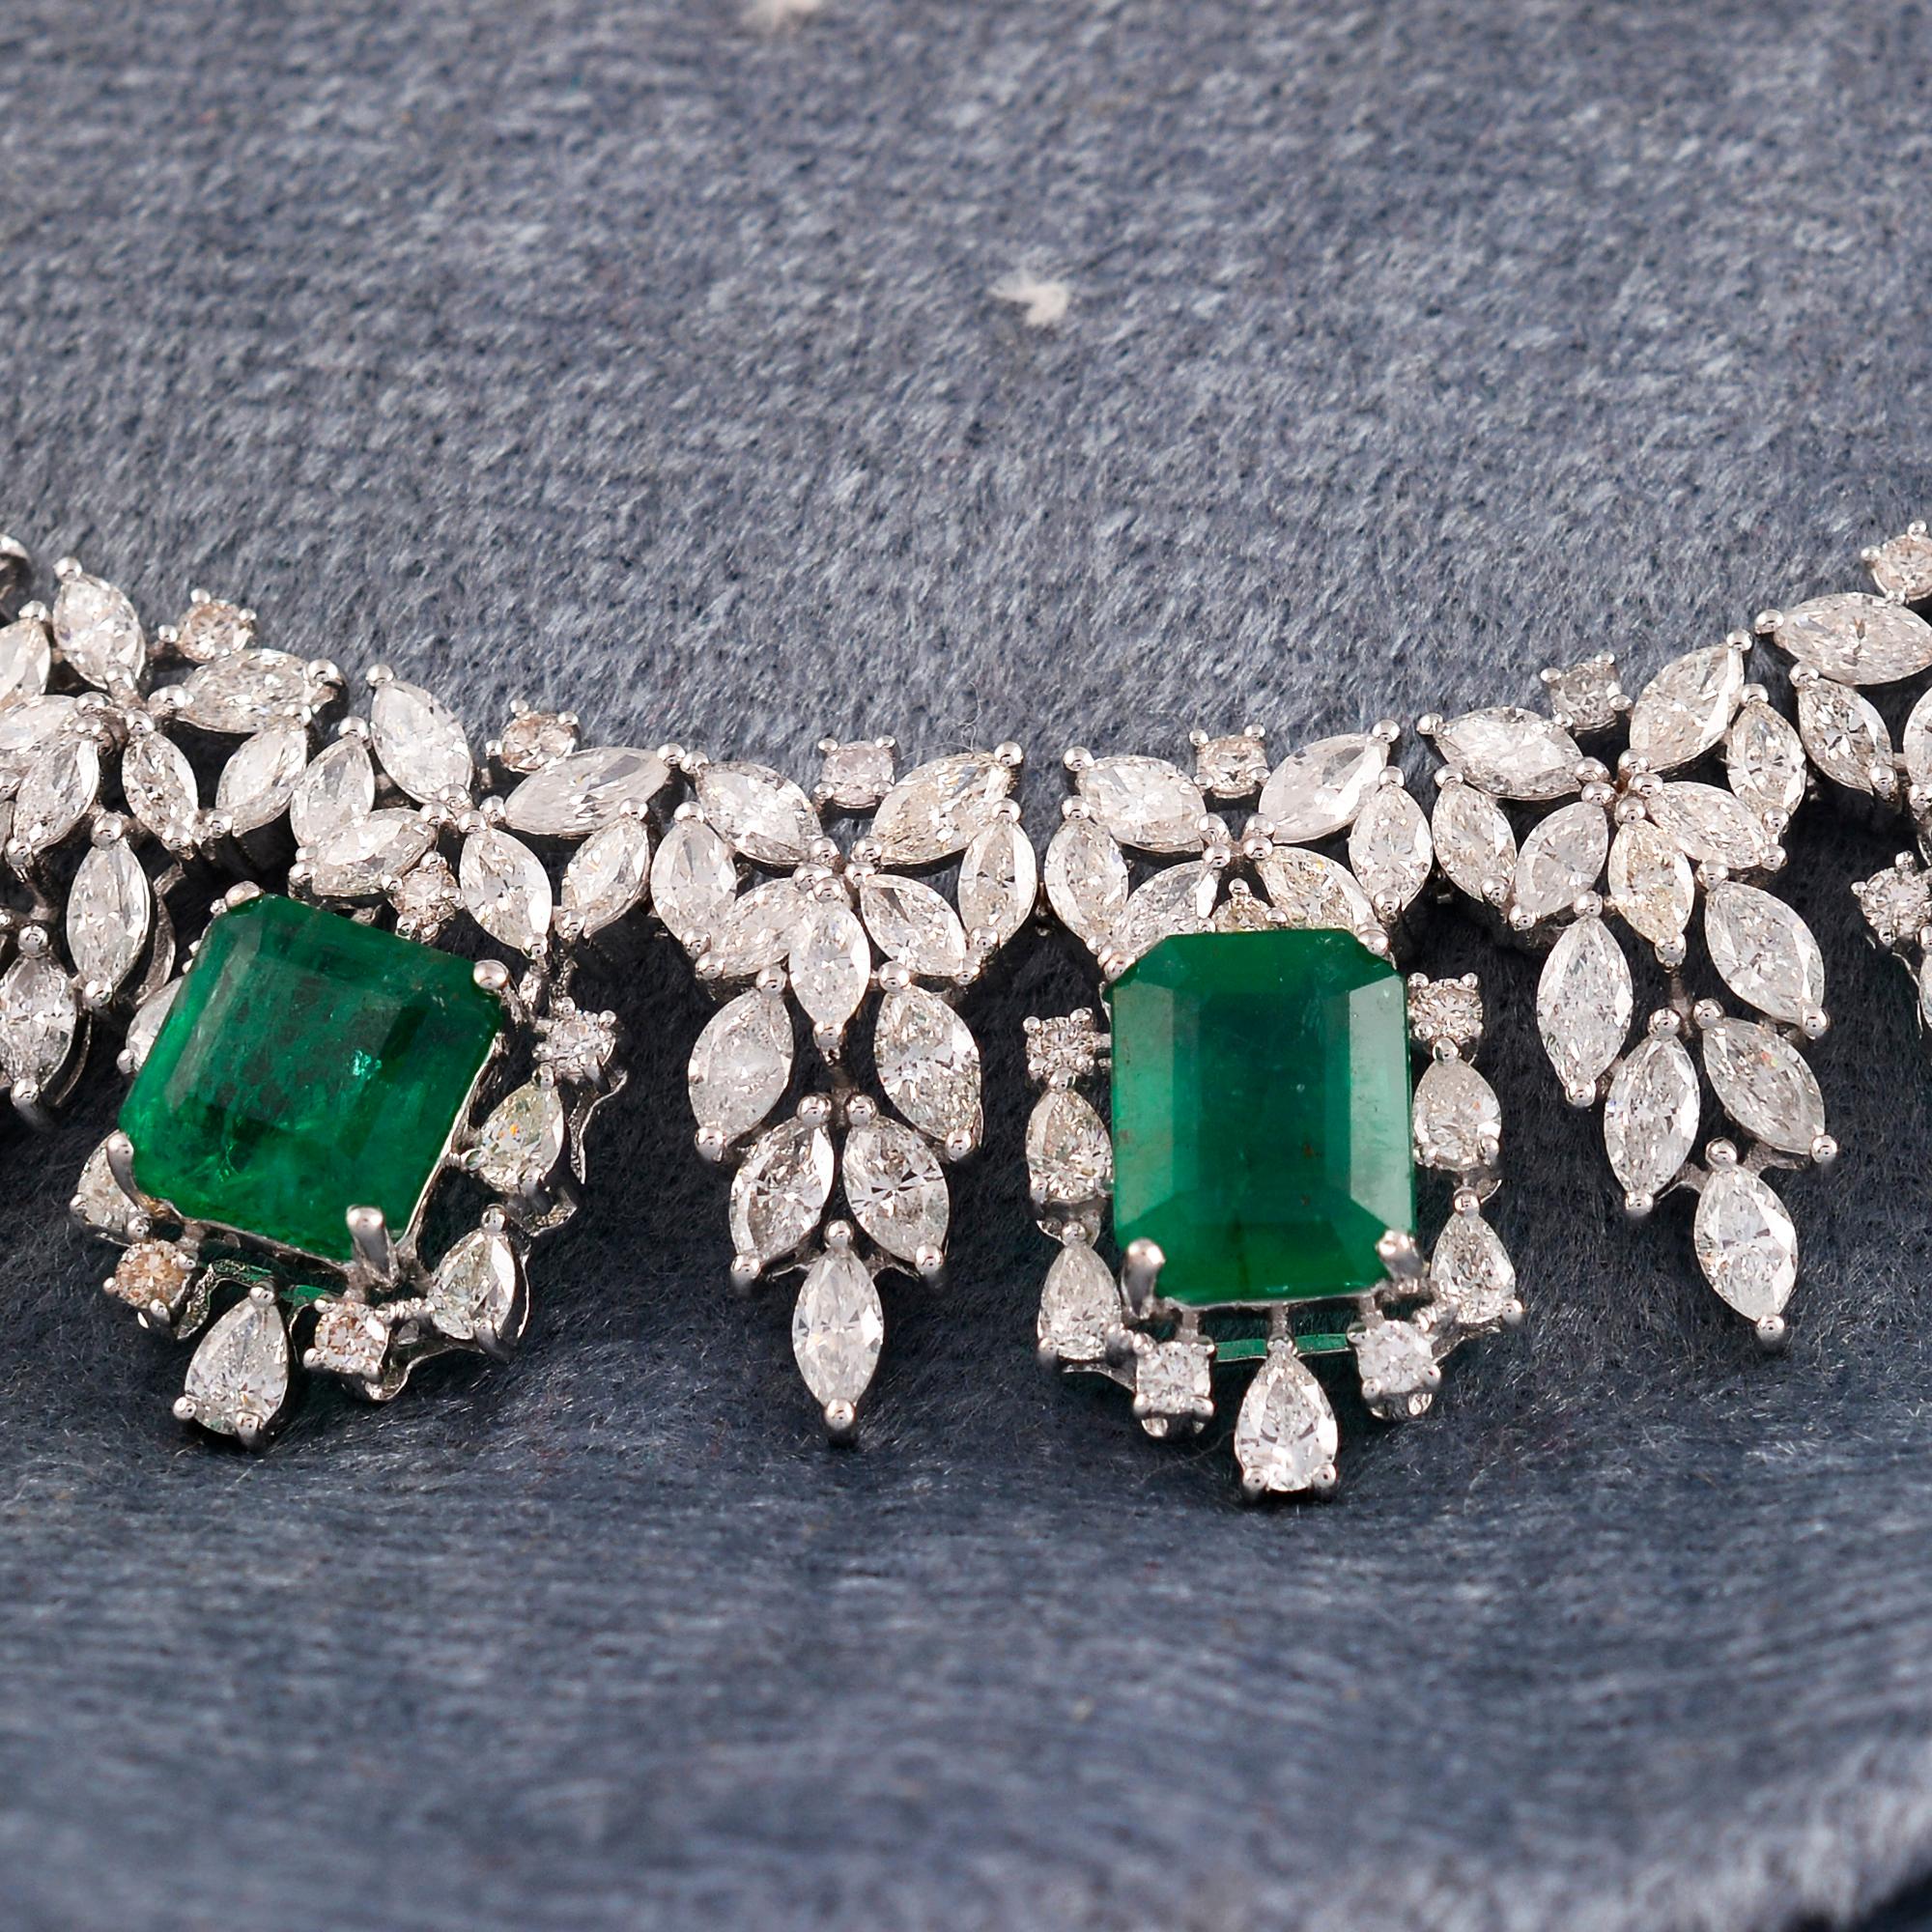 Adorn yourself with the enchanting beauty of this Natural Emerald Gemstone Choker Diamond Necklace. Crafted in 14 karat white gold, this exquisite piece showcases a captivating emerald gemstone accompanied by shimmering diamonds, creating a stunning